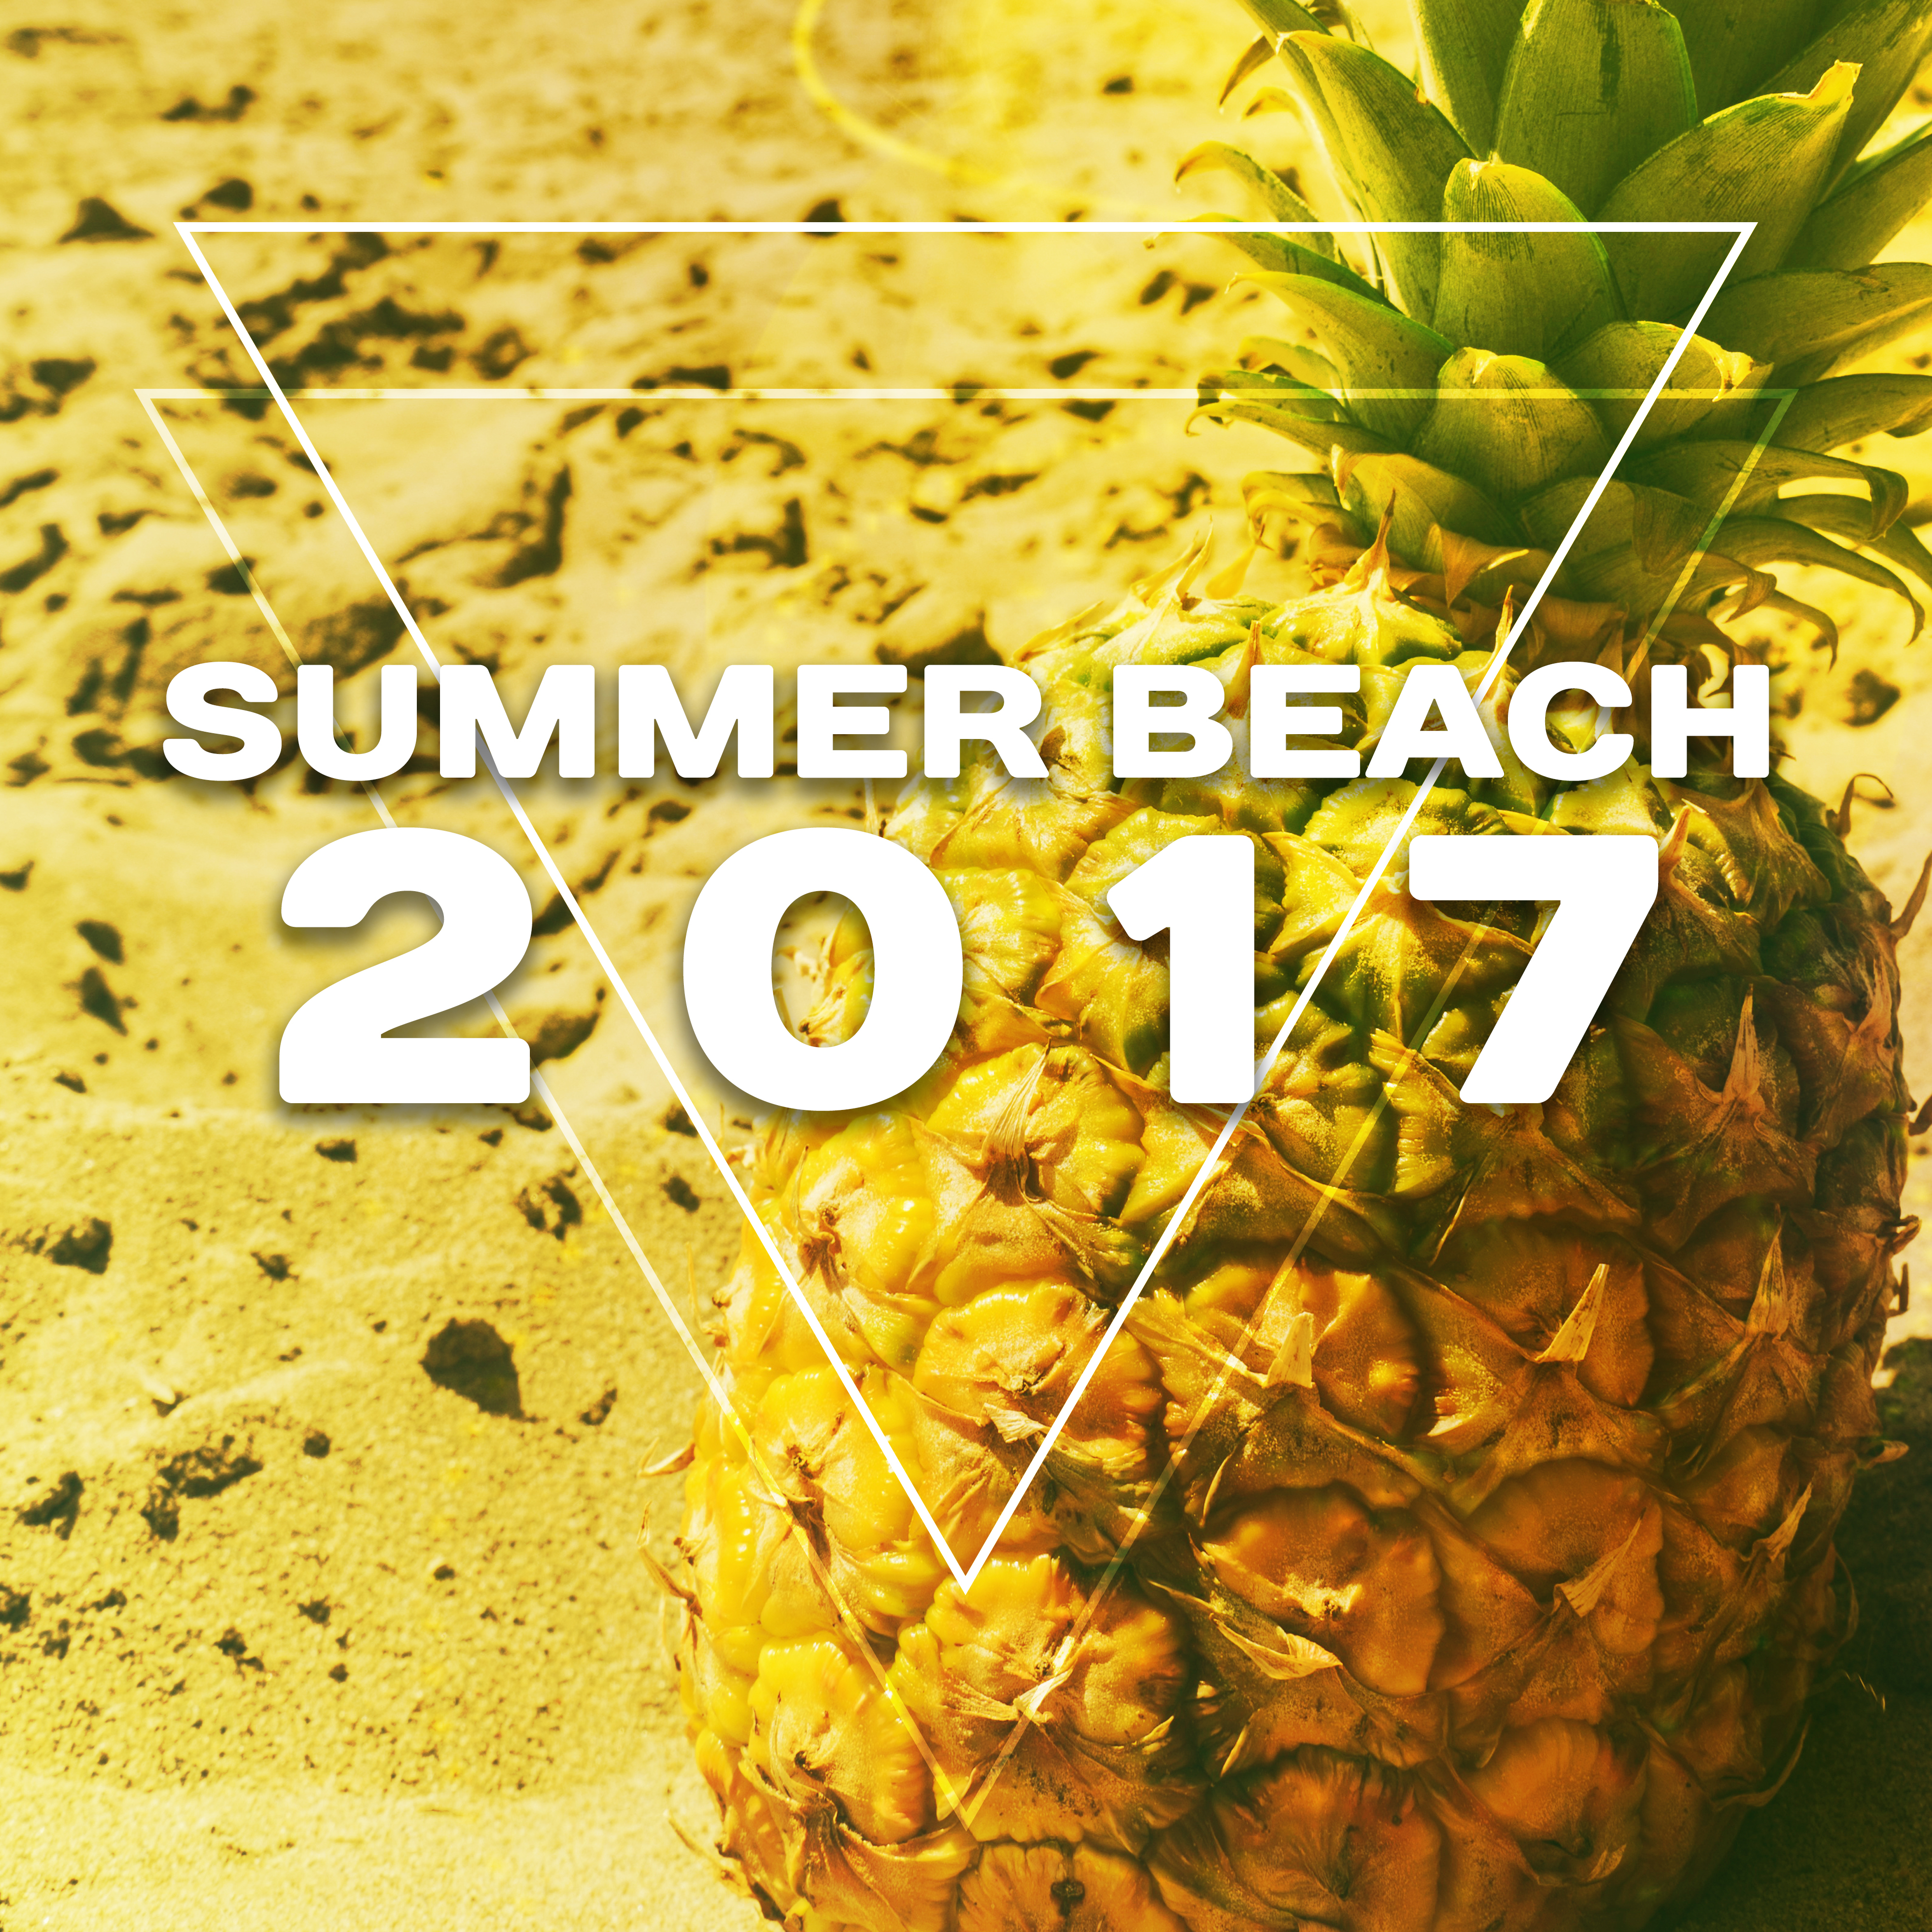 Summer Beach 2017 – Lounge, Relax, Chill Out 2017, 69 Lounge, Party Music